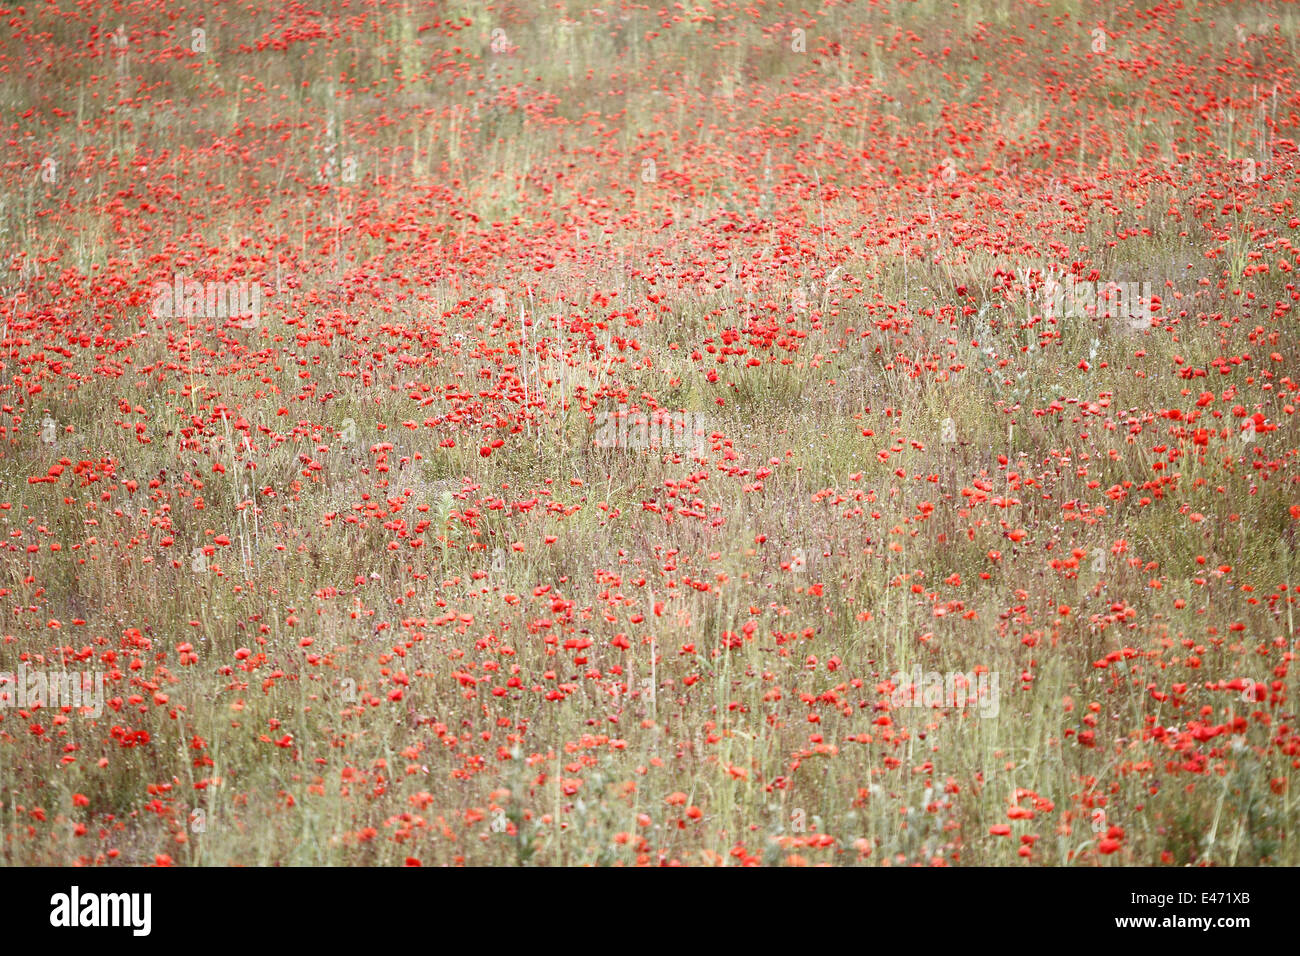 Field of Remembrance poppies Papaver rhoeas Stock Photo